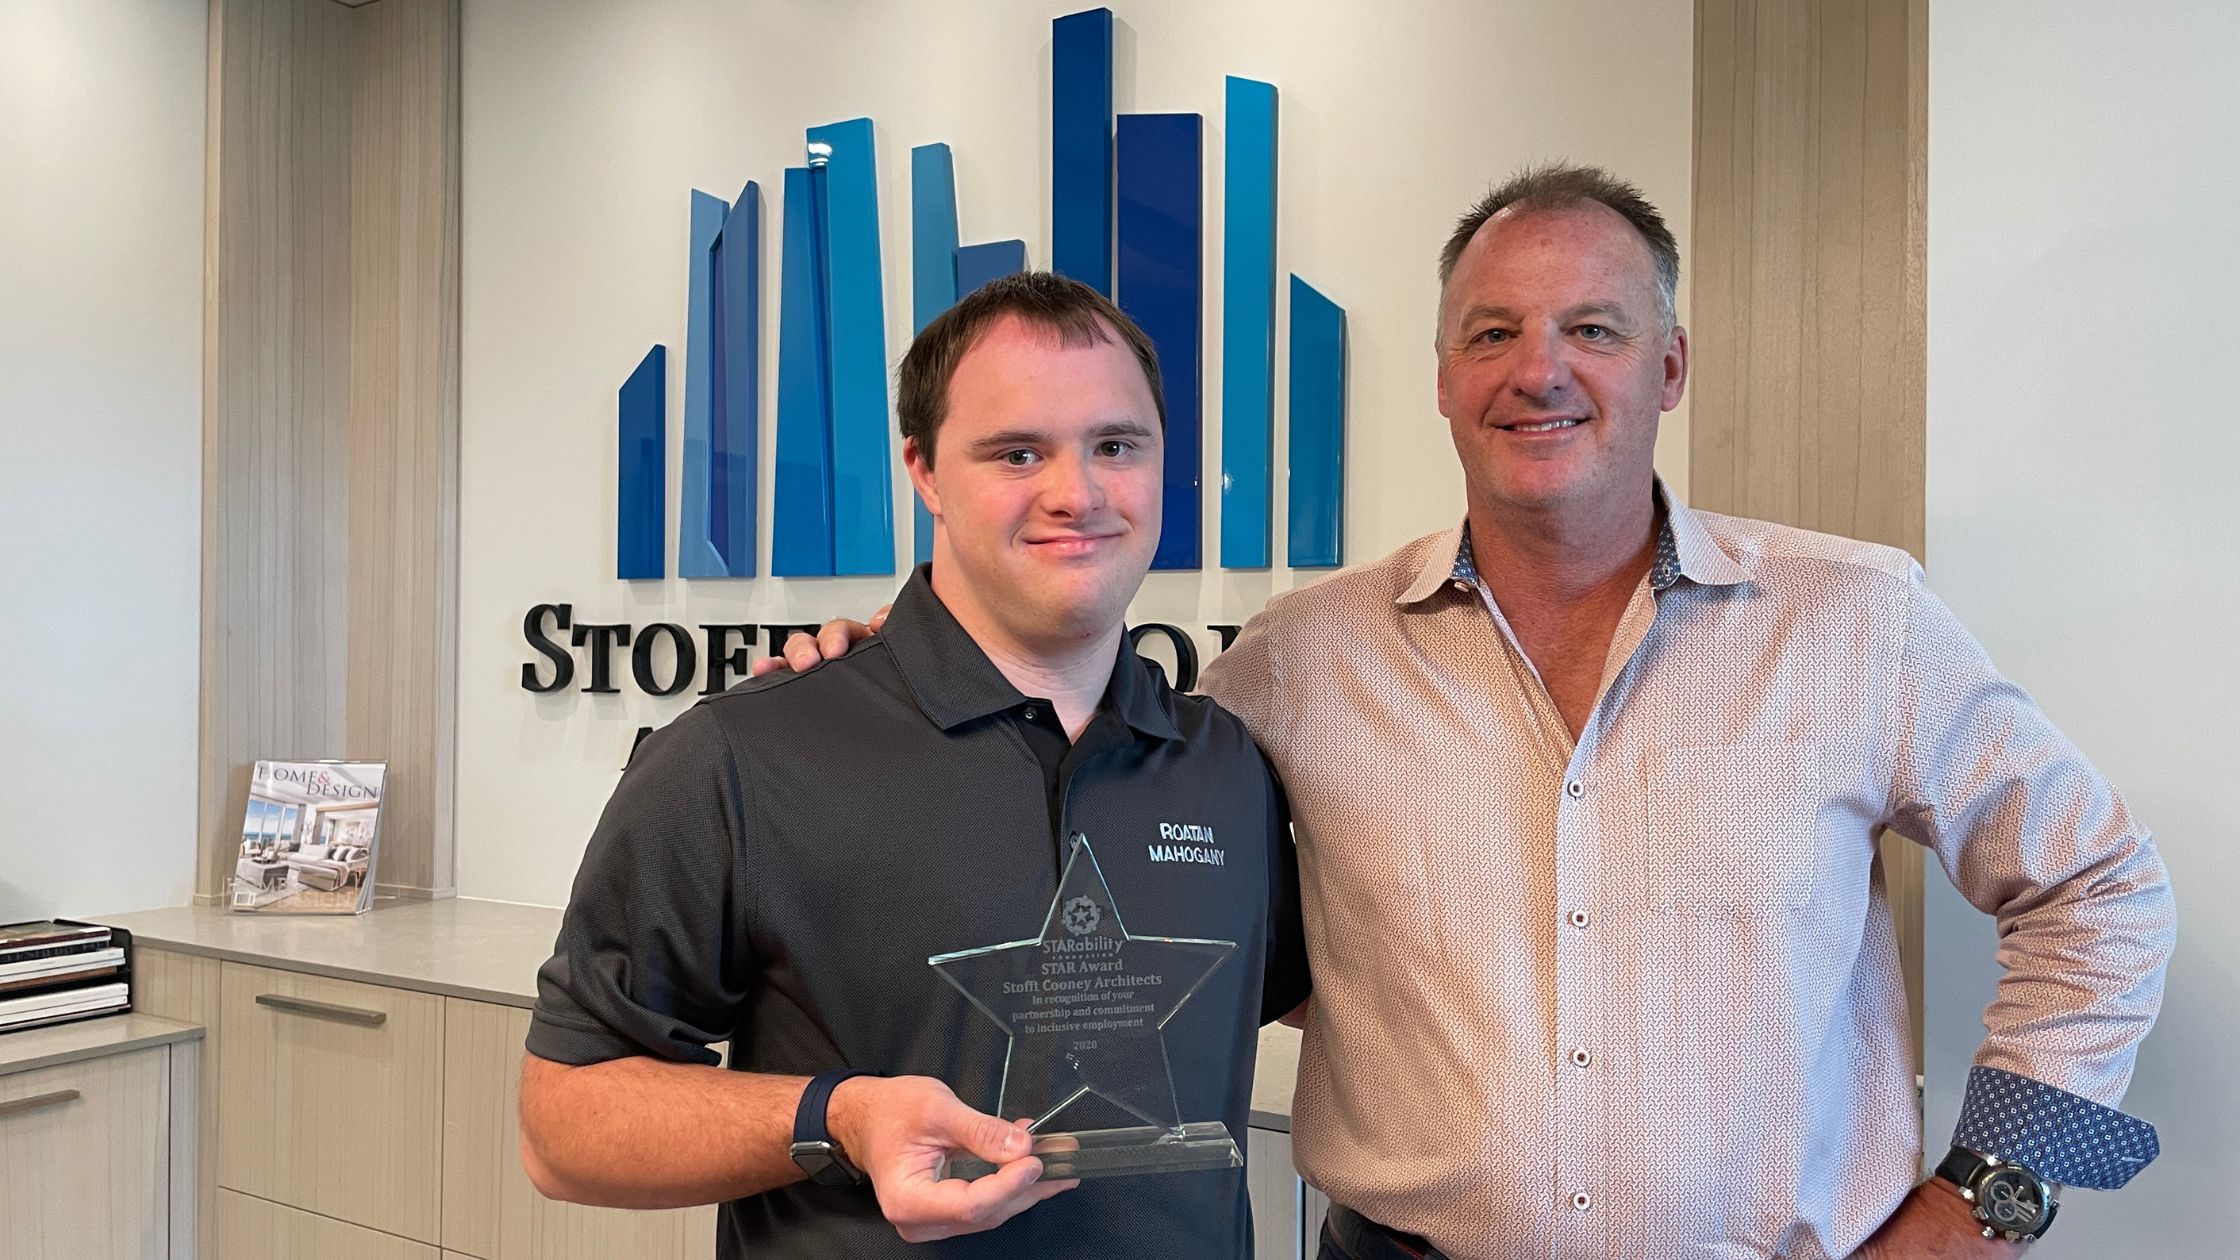 matthew m. with john cooney at stofft cooney architects accepting his star award